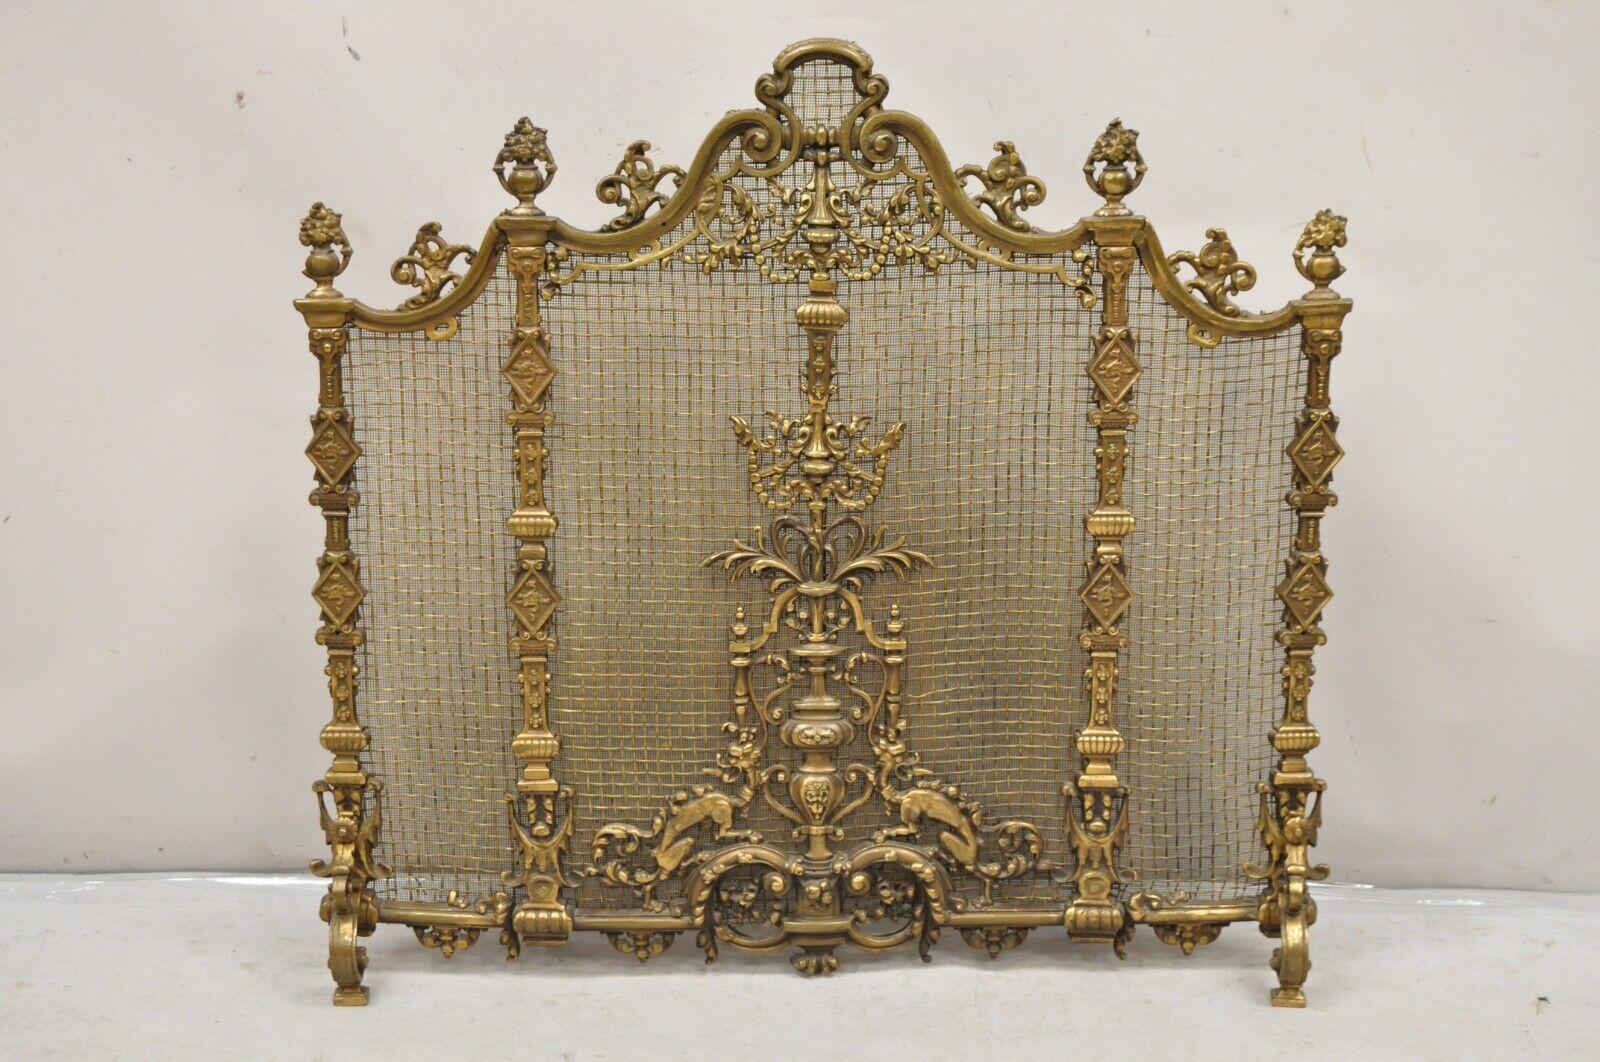 Antique French Renaissance Baroque Style Figural Bronze Mesh Fireplace Screen. Item features figural dragons to front, ornate leafy scrolls and drapes, very impressive item. Circa Late 19th - Early 20th Century. Measurements: 37